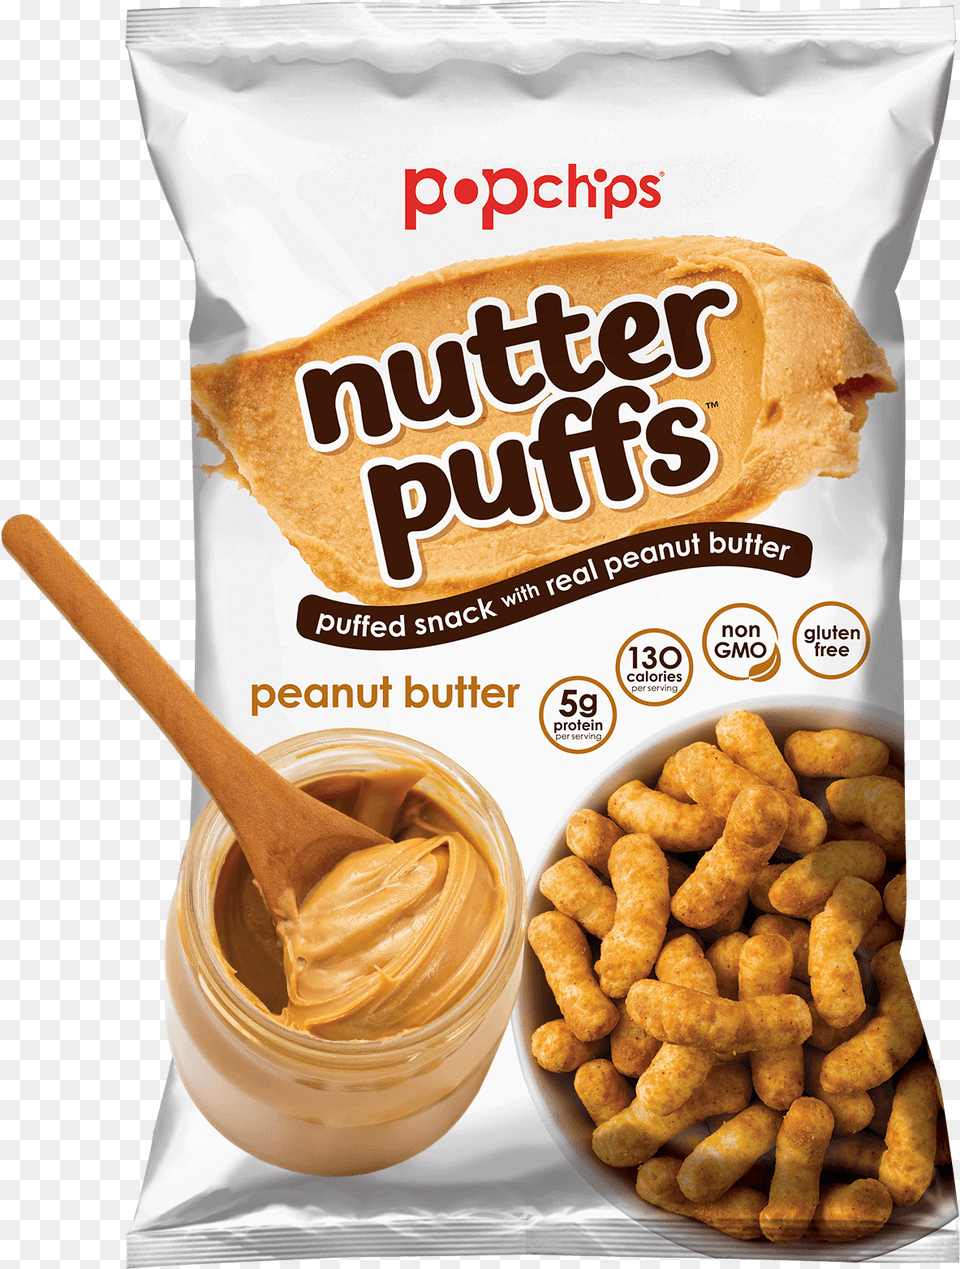 Popchips Peanut Butter Nutter Puffs, Food, Bread, Peanut Butter, Snack Free Png